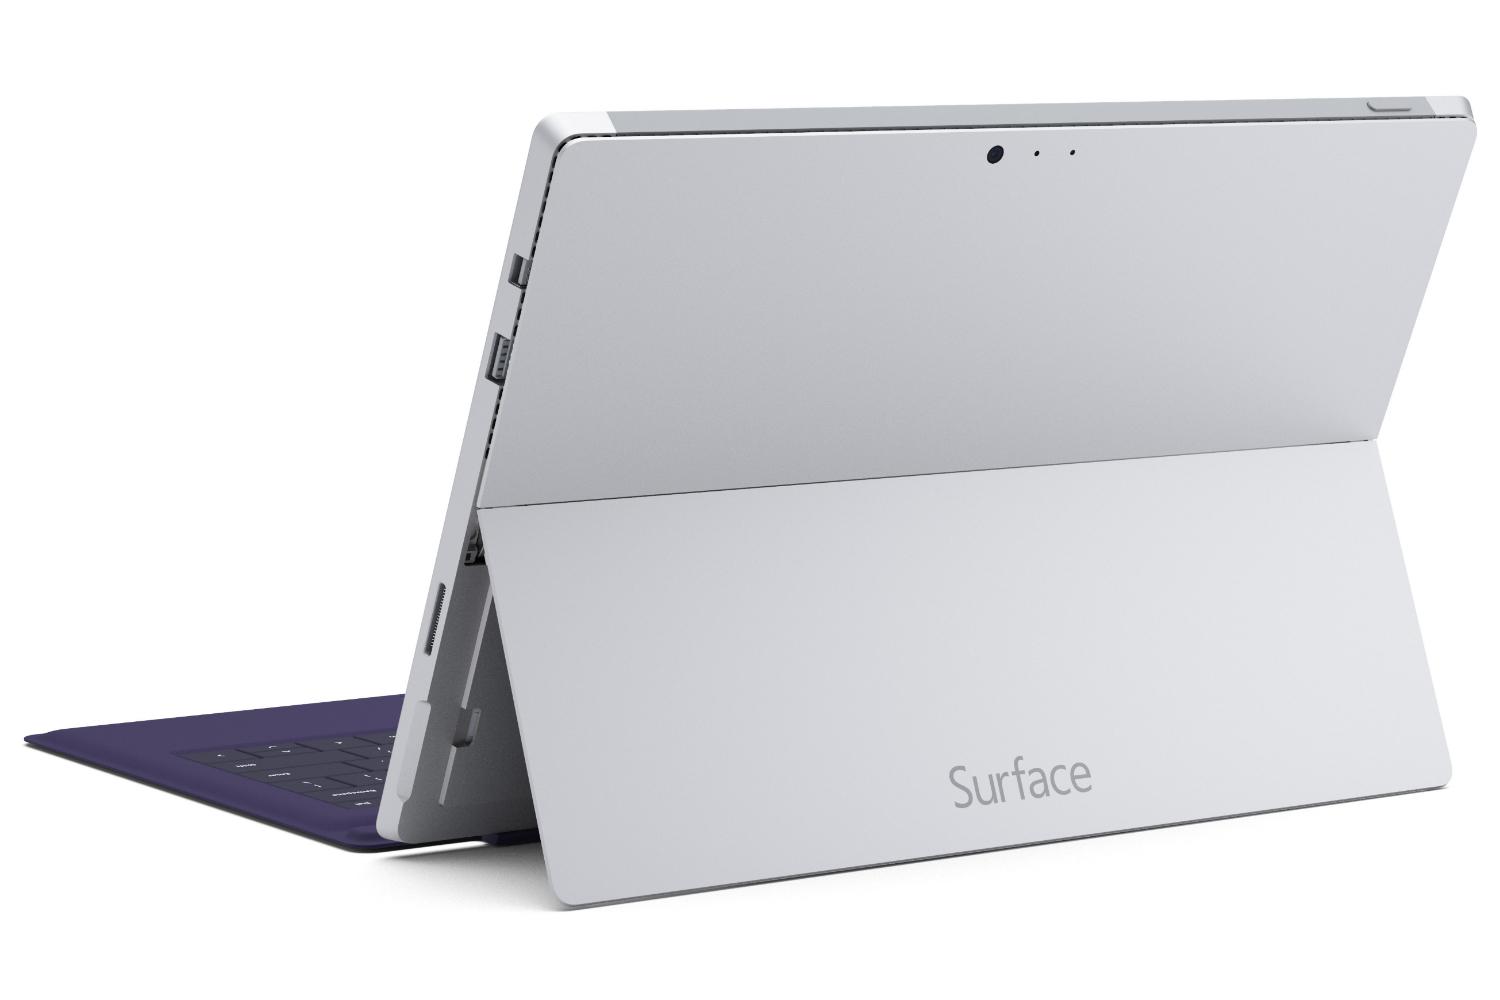 Microsoft Surface Pro 3: Release Date, Specs, News, and More